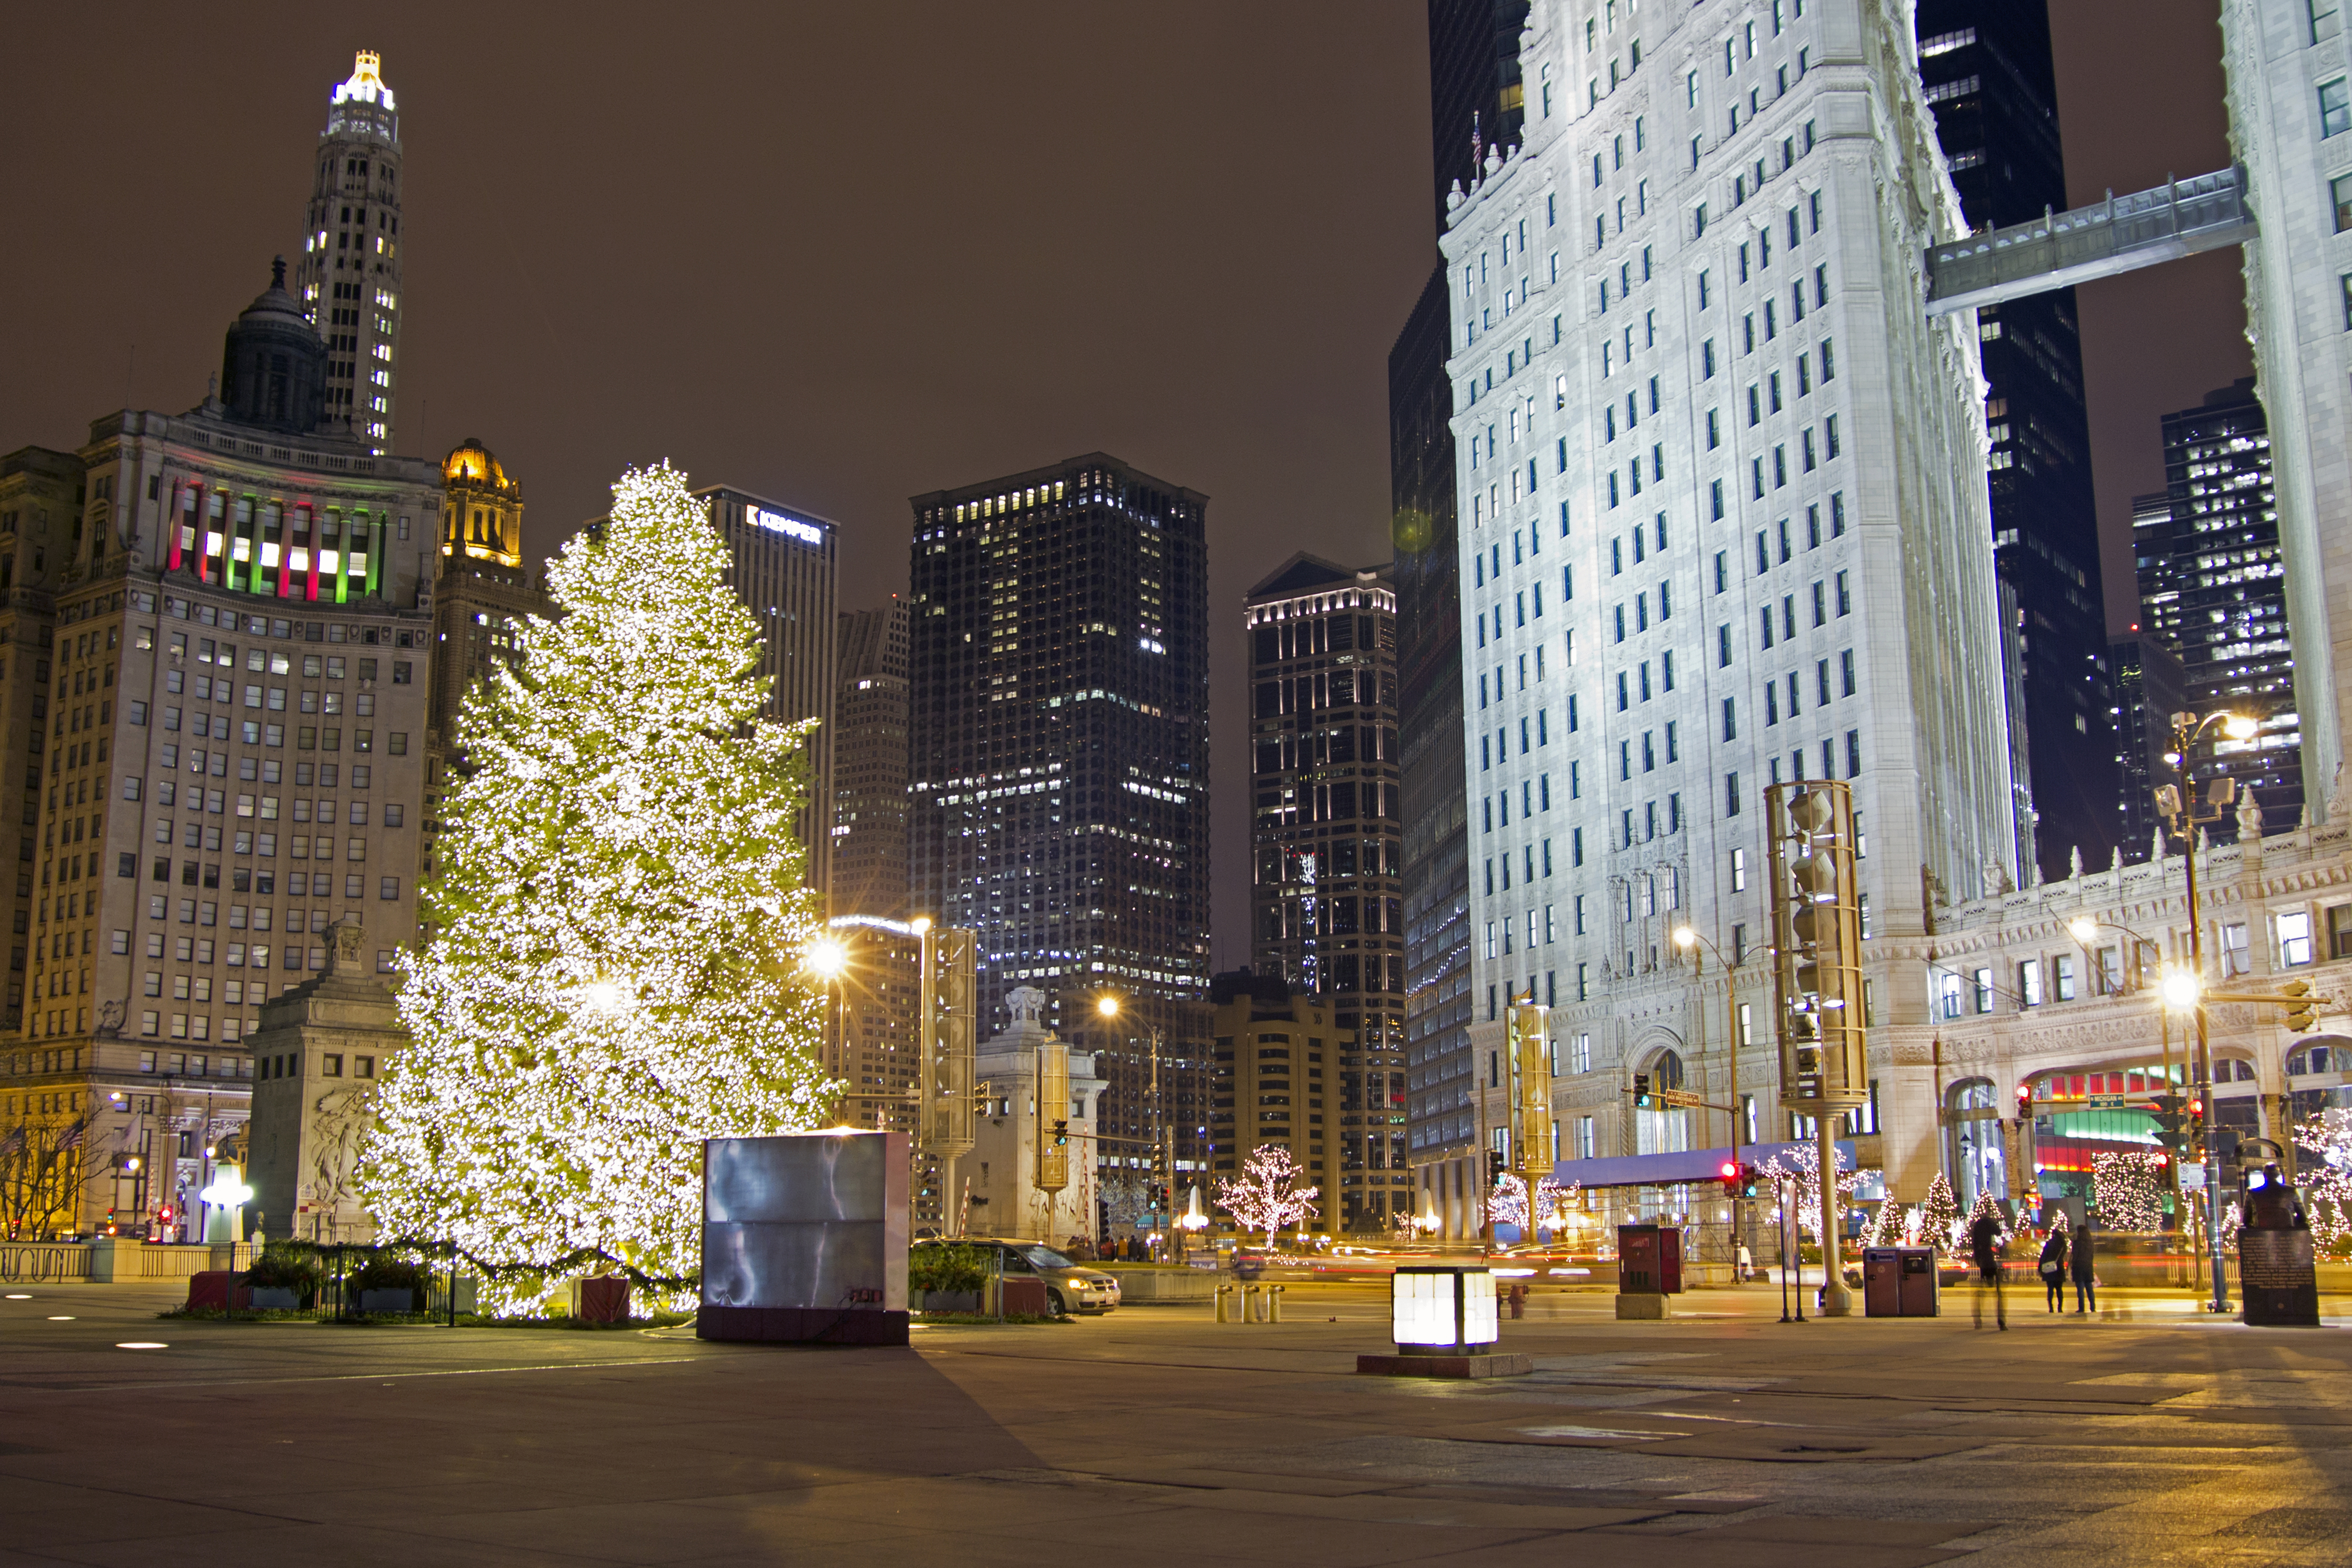 A huge Christmas tree covered in lights in Downtown Chicago.